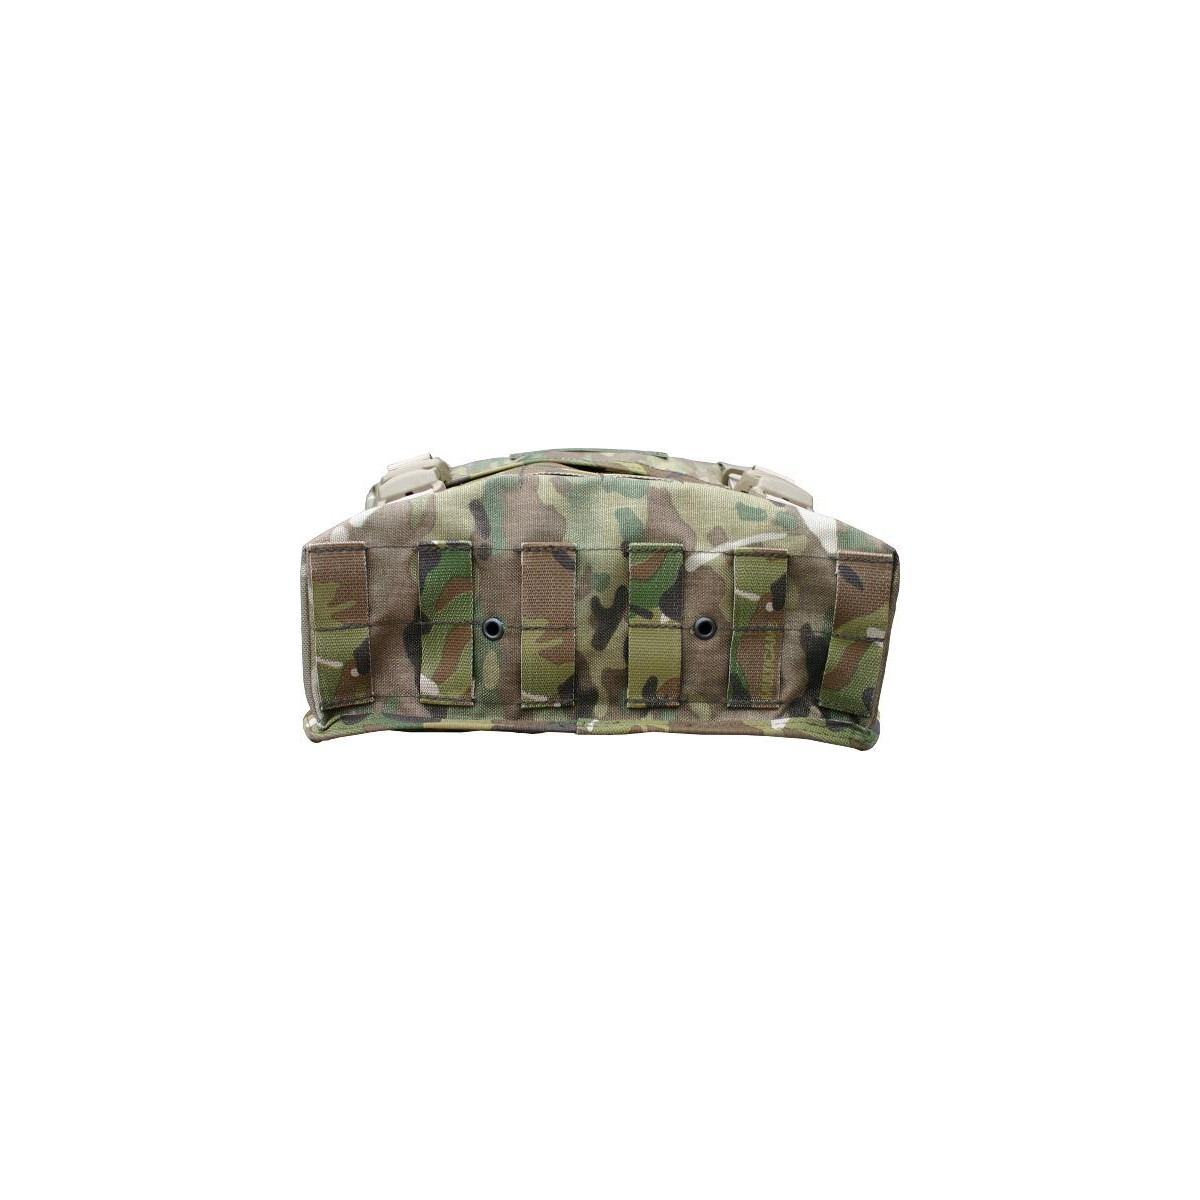 Molle supply bag